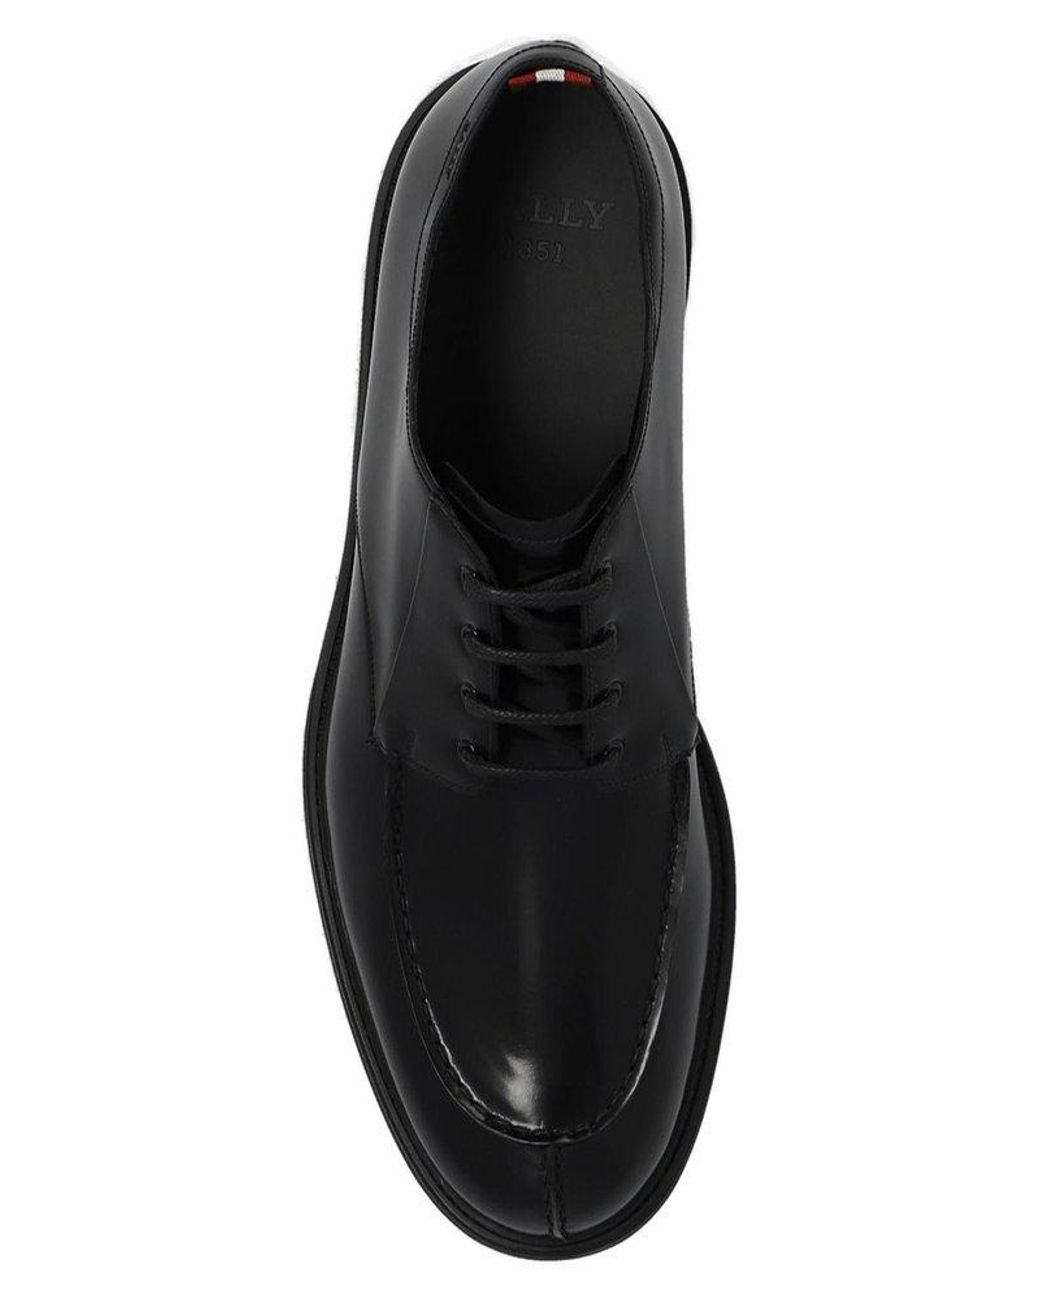 Bally Nievro Lace-up Shoes in Black for Men